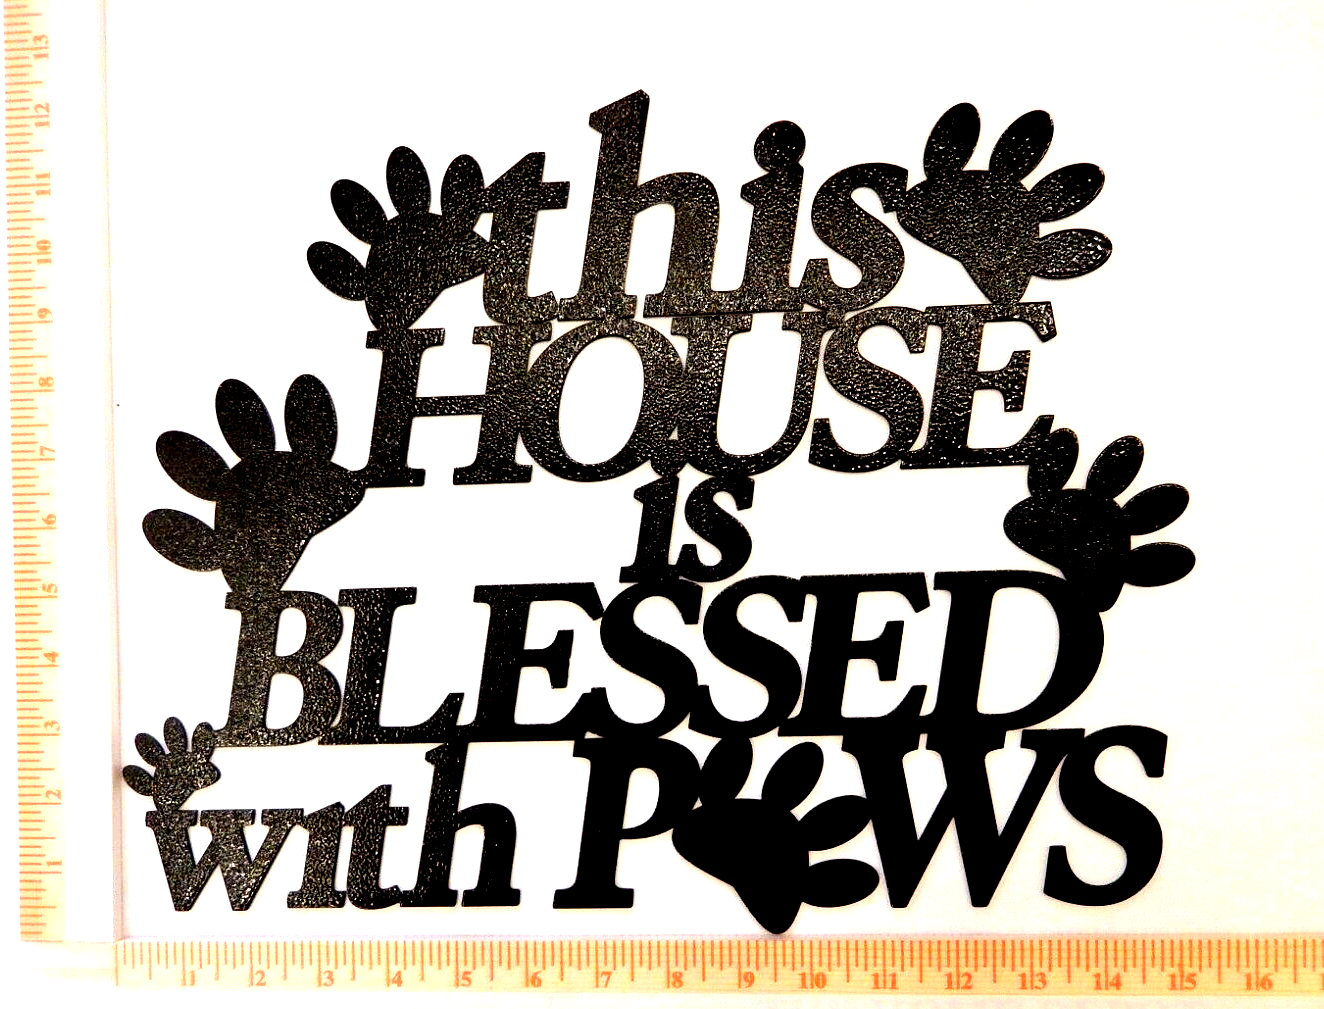 ~NEW~14ga. "THIS HOUSE IS BLESSED WITH PAWS" PowderCoat Metal Wall Art 15" x 12"